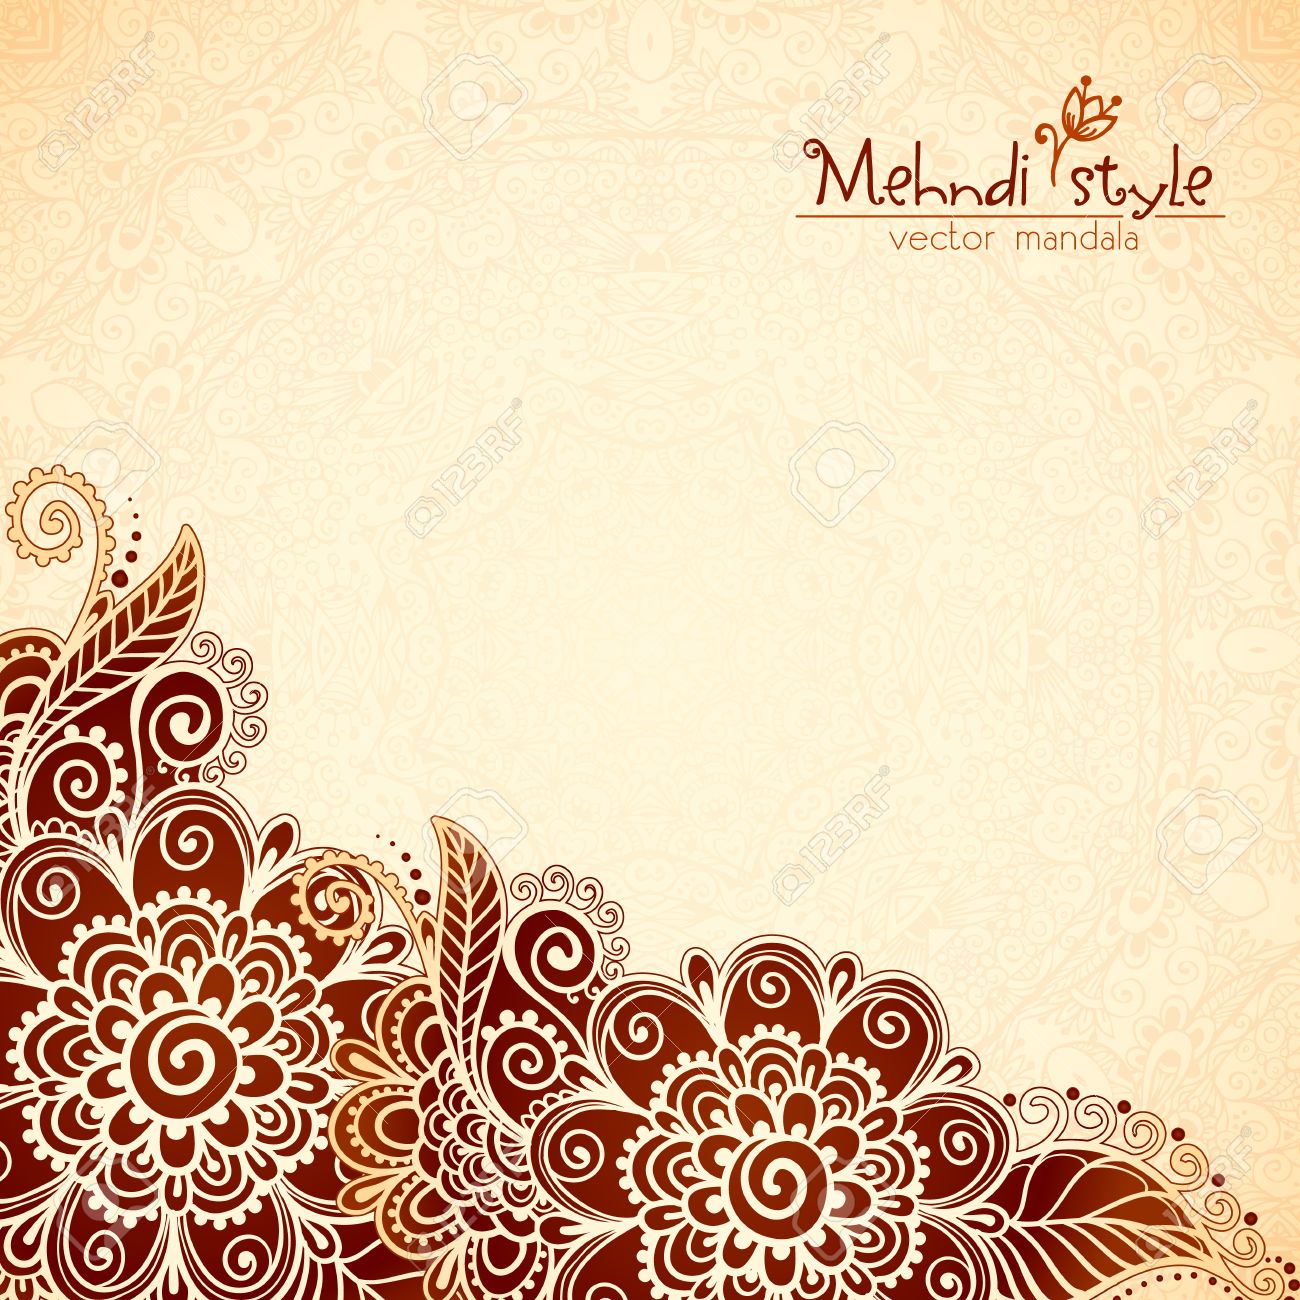 Vector Floral Vintage Ethnic Background In Indian Mehndi Style